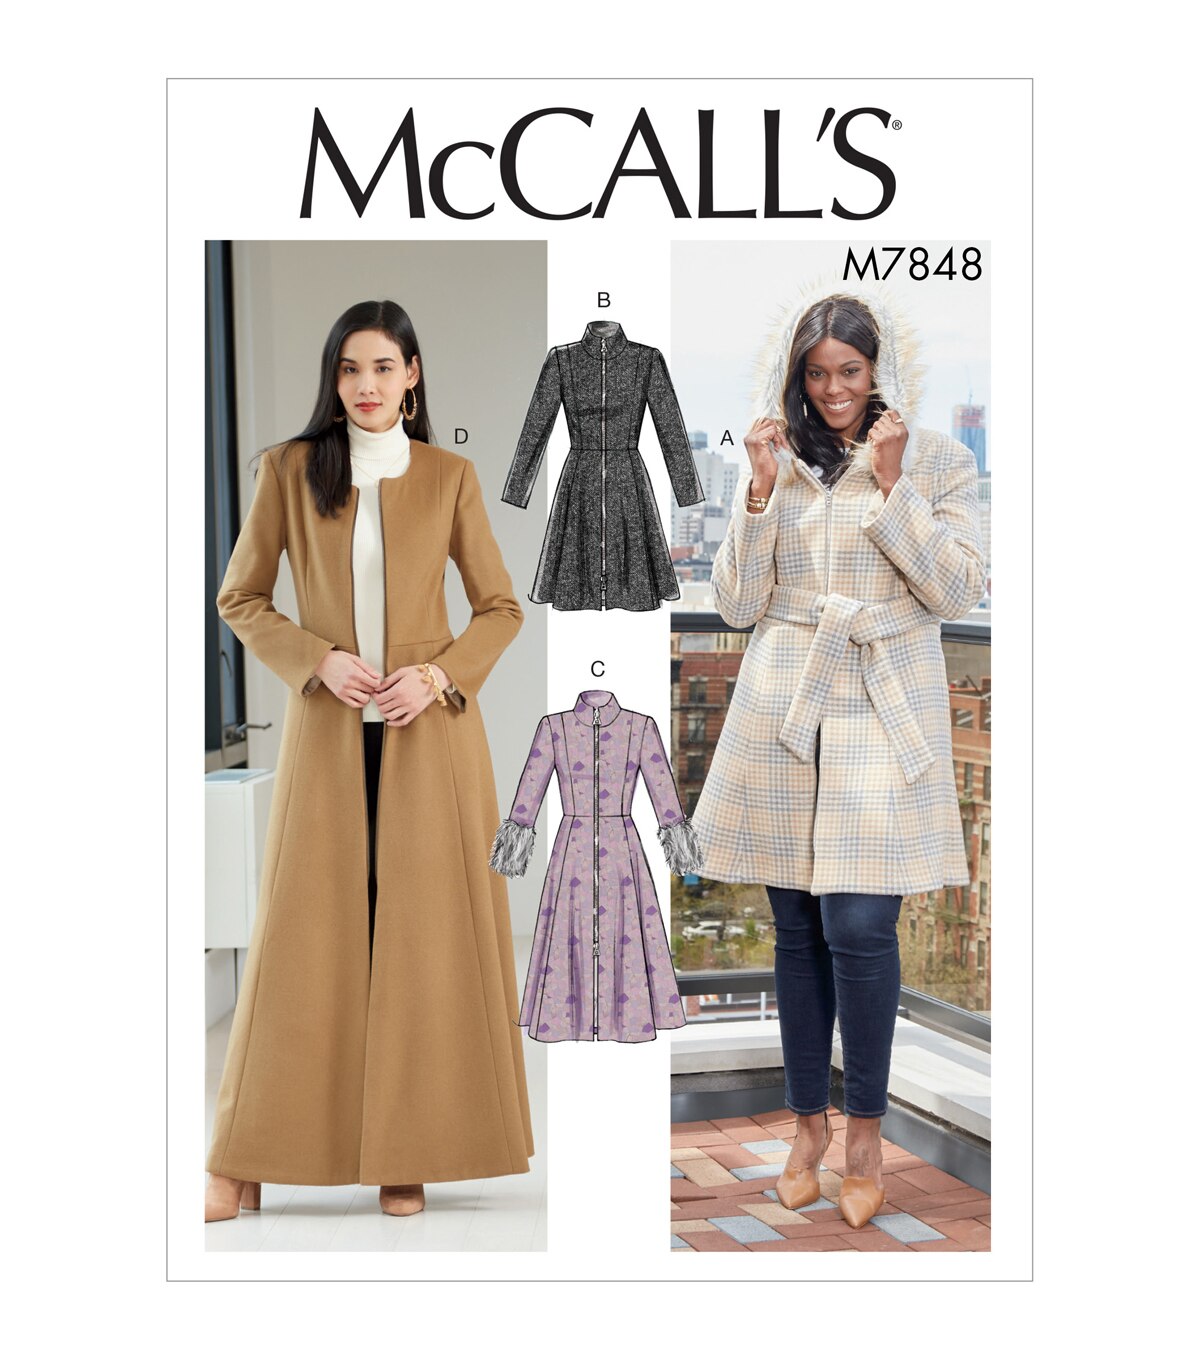 McCALLS 7848 - SEWING A COAT PART 2: PATTERN ALTERATIONS — BURIED